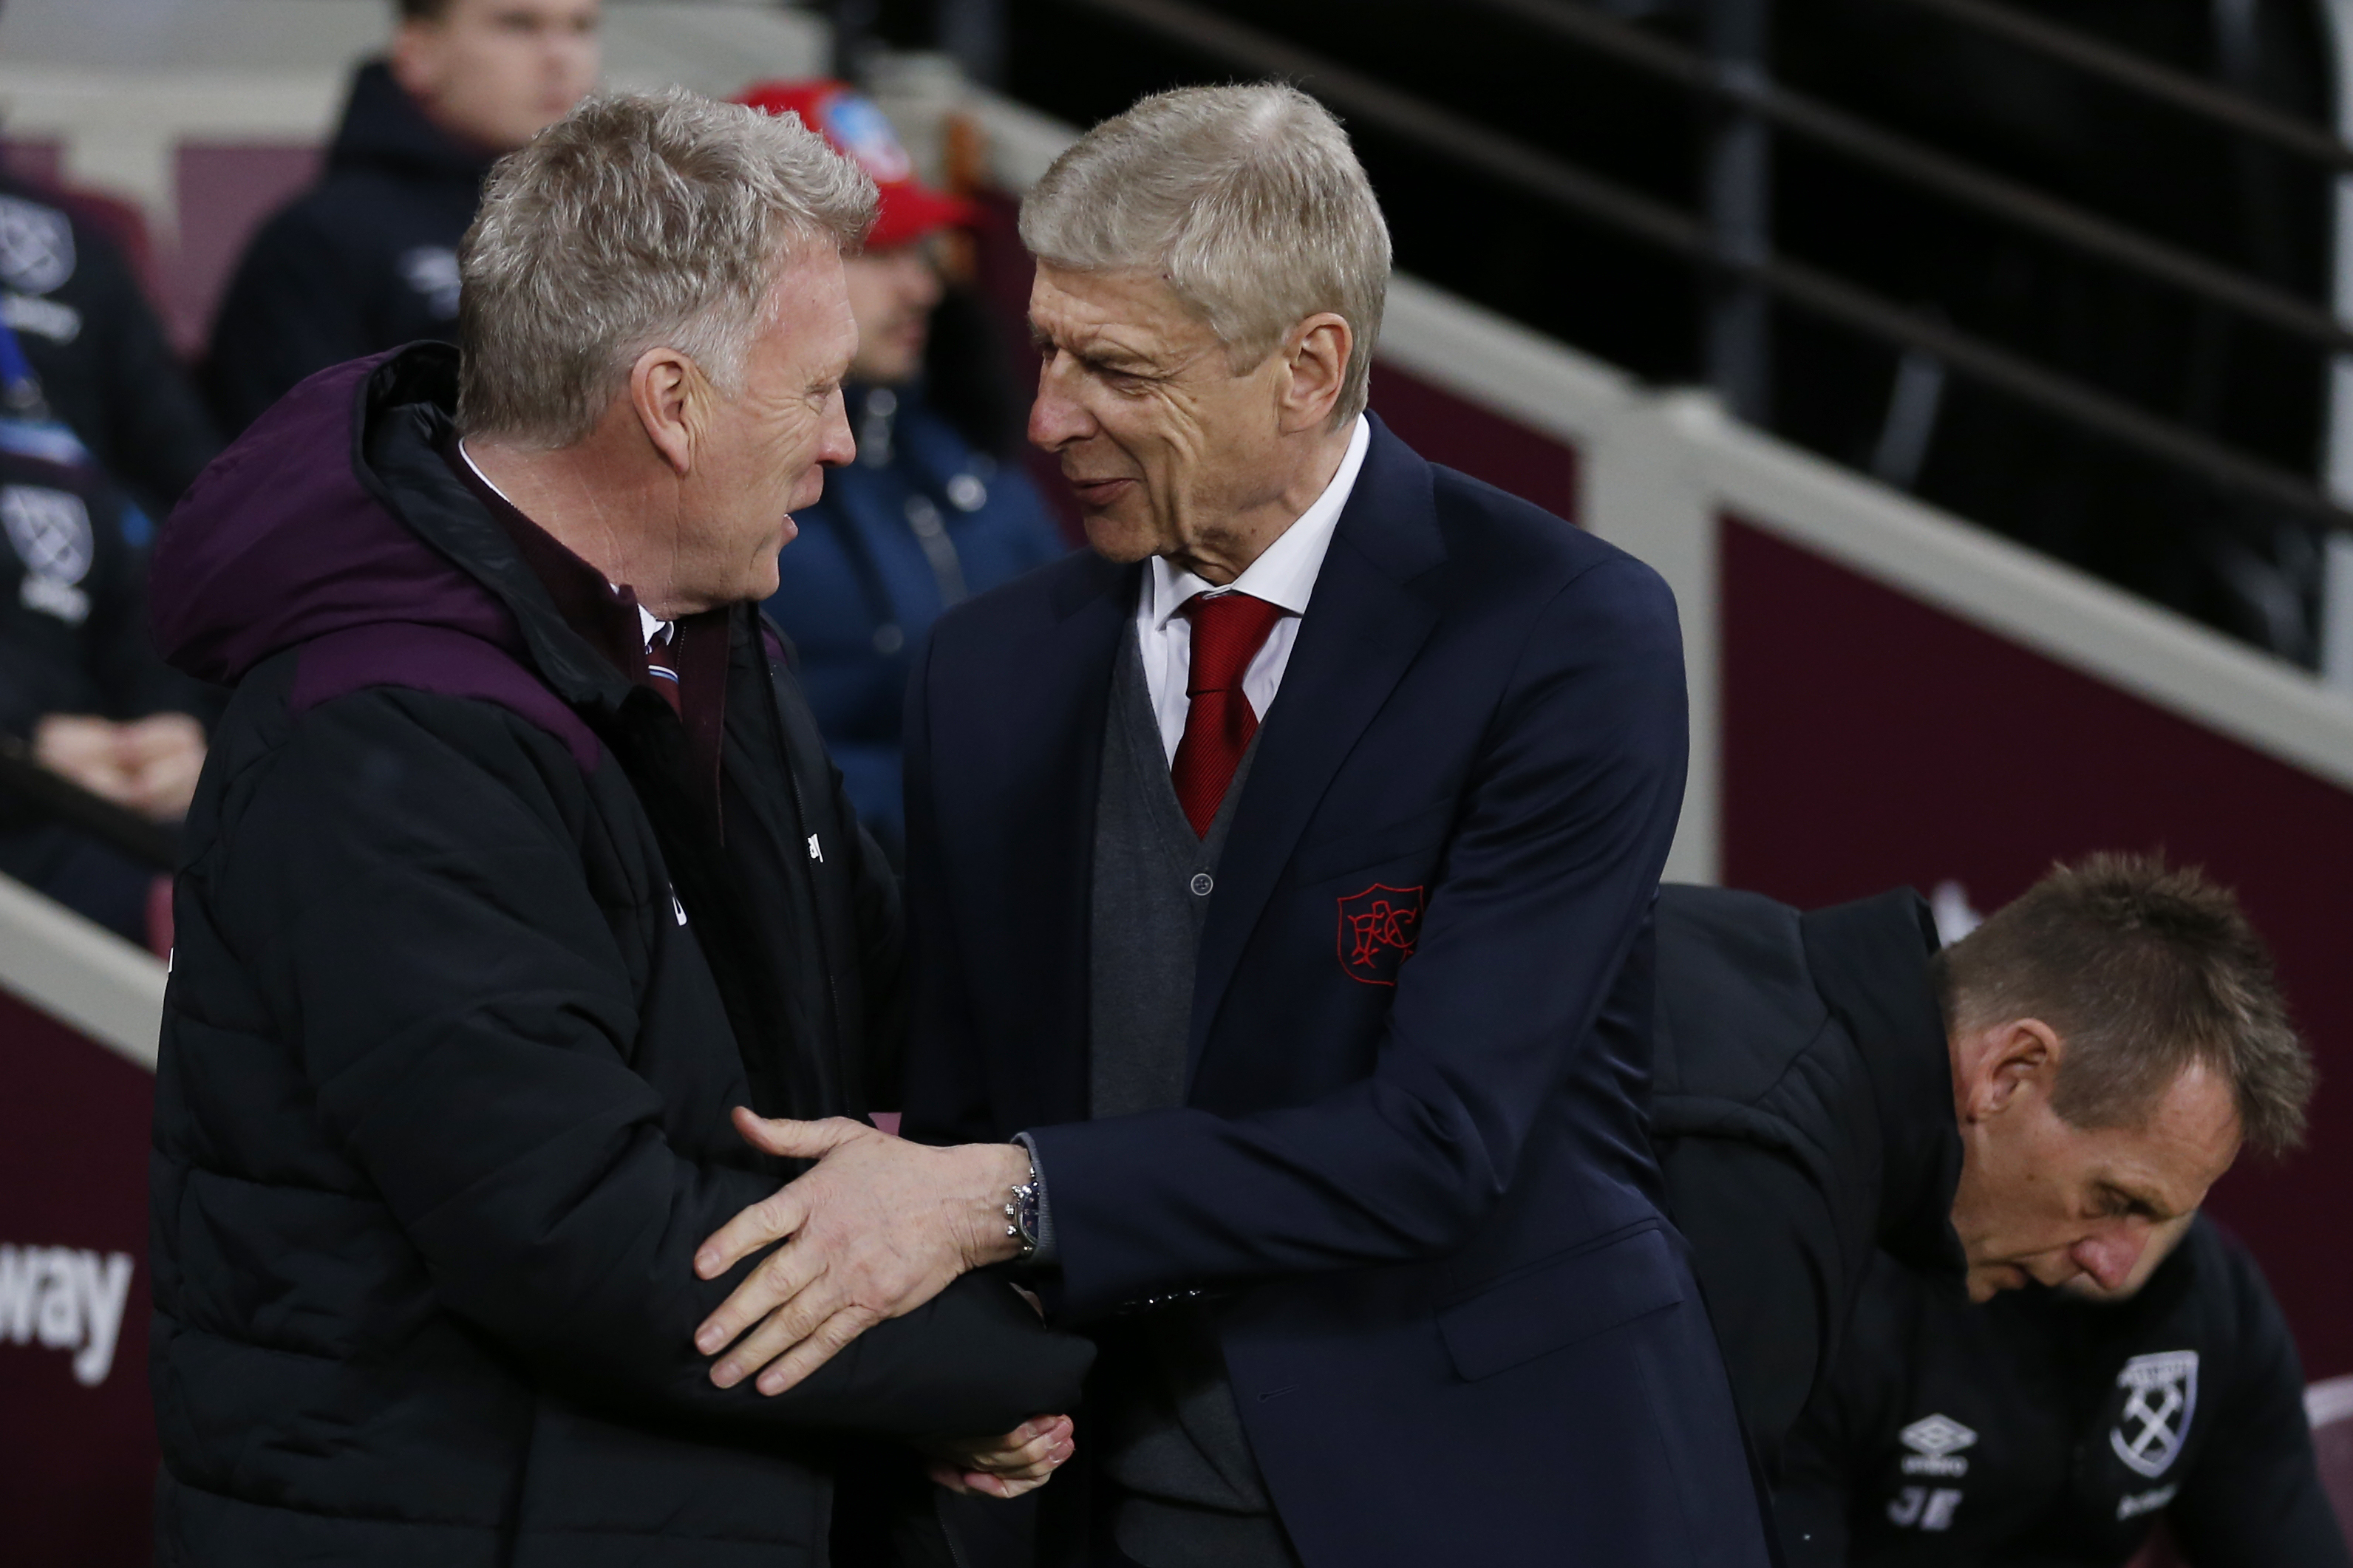 West Ham United's Scottish manager David Moyes (L) greets Arsenal's French manager Arsene Wenger before the English Premier League football match between West Ham United and Arsenal at The London Stadium, in east London on December 13, 2017. / AFP PHOTO / Ian KINGTON / RESTRICTED TO EDITORIAL USE. No use with unauthorized audio, video, data, fixture lists, club/league logos or 'live' services. Online in-match use limited to 75 images, no video emulation. No use in betting, games or single club/league/player publications.  /         (Photo credit should read IAN KINGTON/AFP/Getty Images)